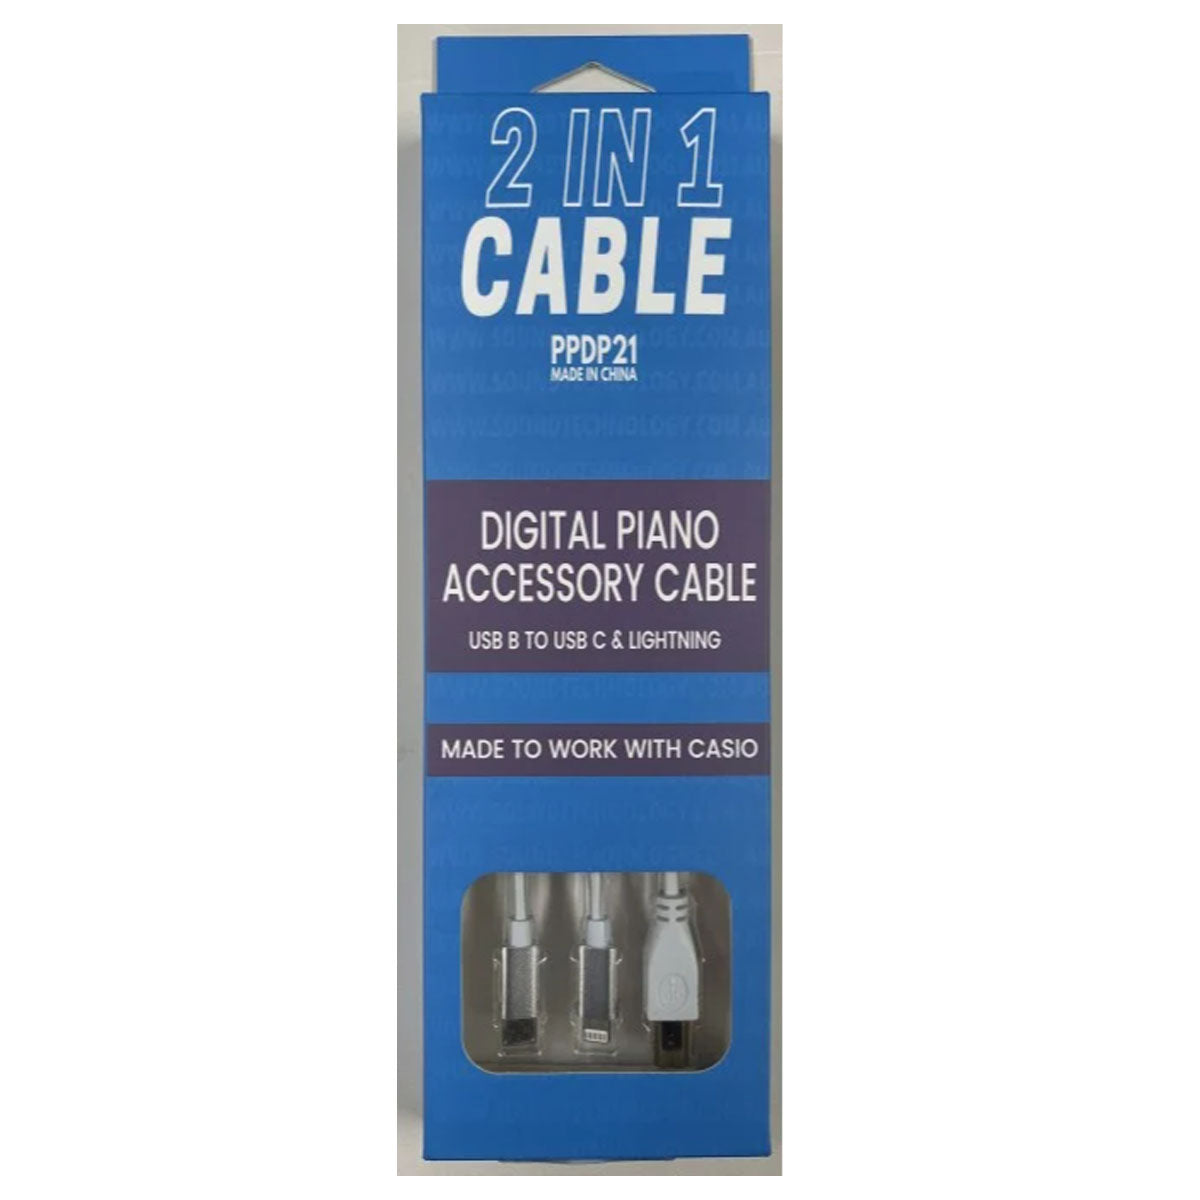 Casio PPDP21 Plug & Play Cable - USB-B to USB-C/Lightening for CASIO Digital Pianos